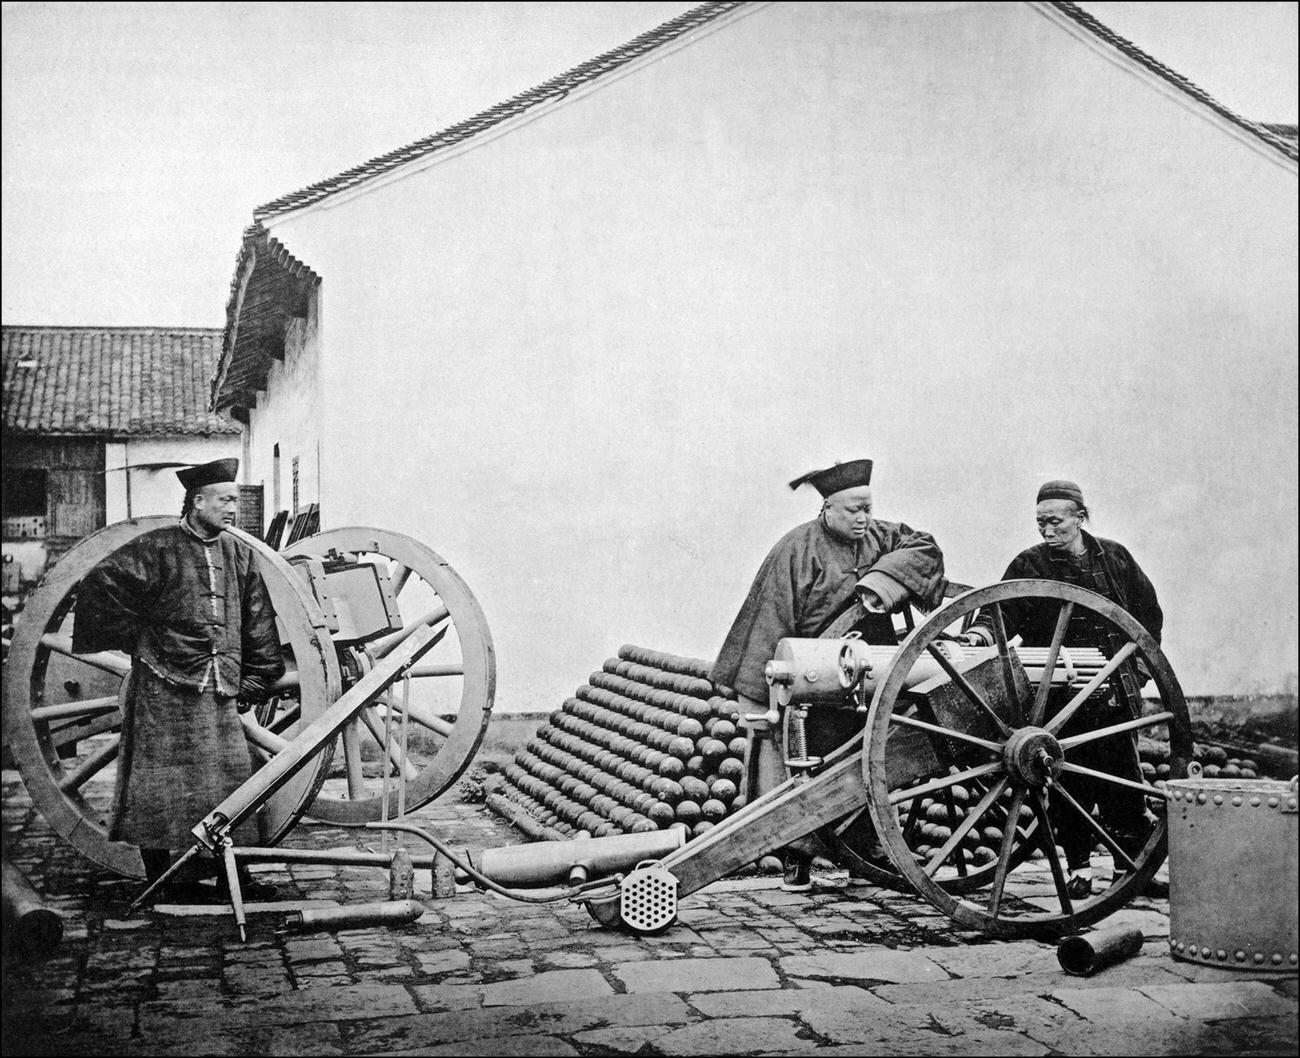 Qing officers at the Nanjing Jinling Arsenal, built in 1865